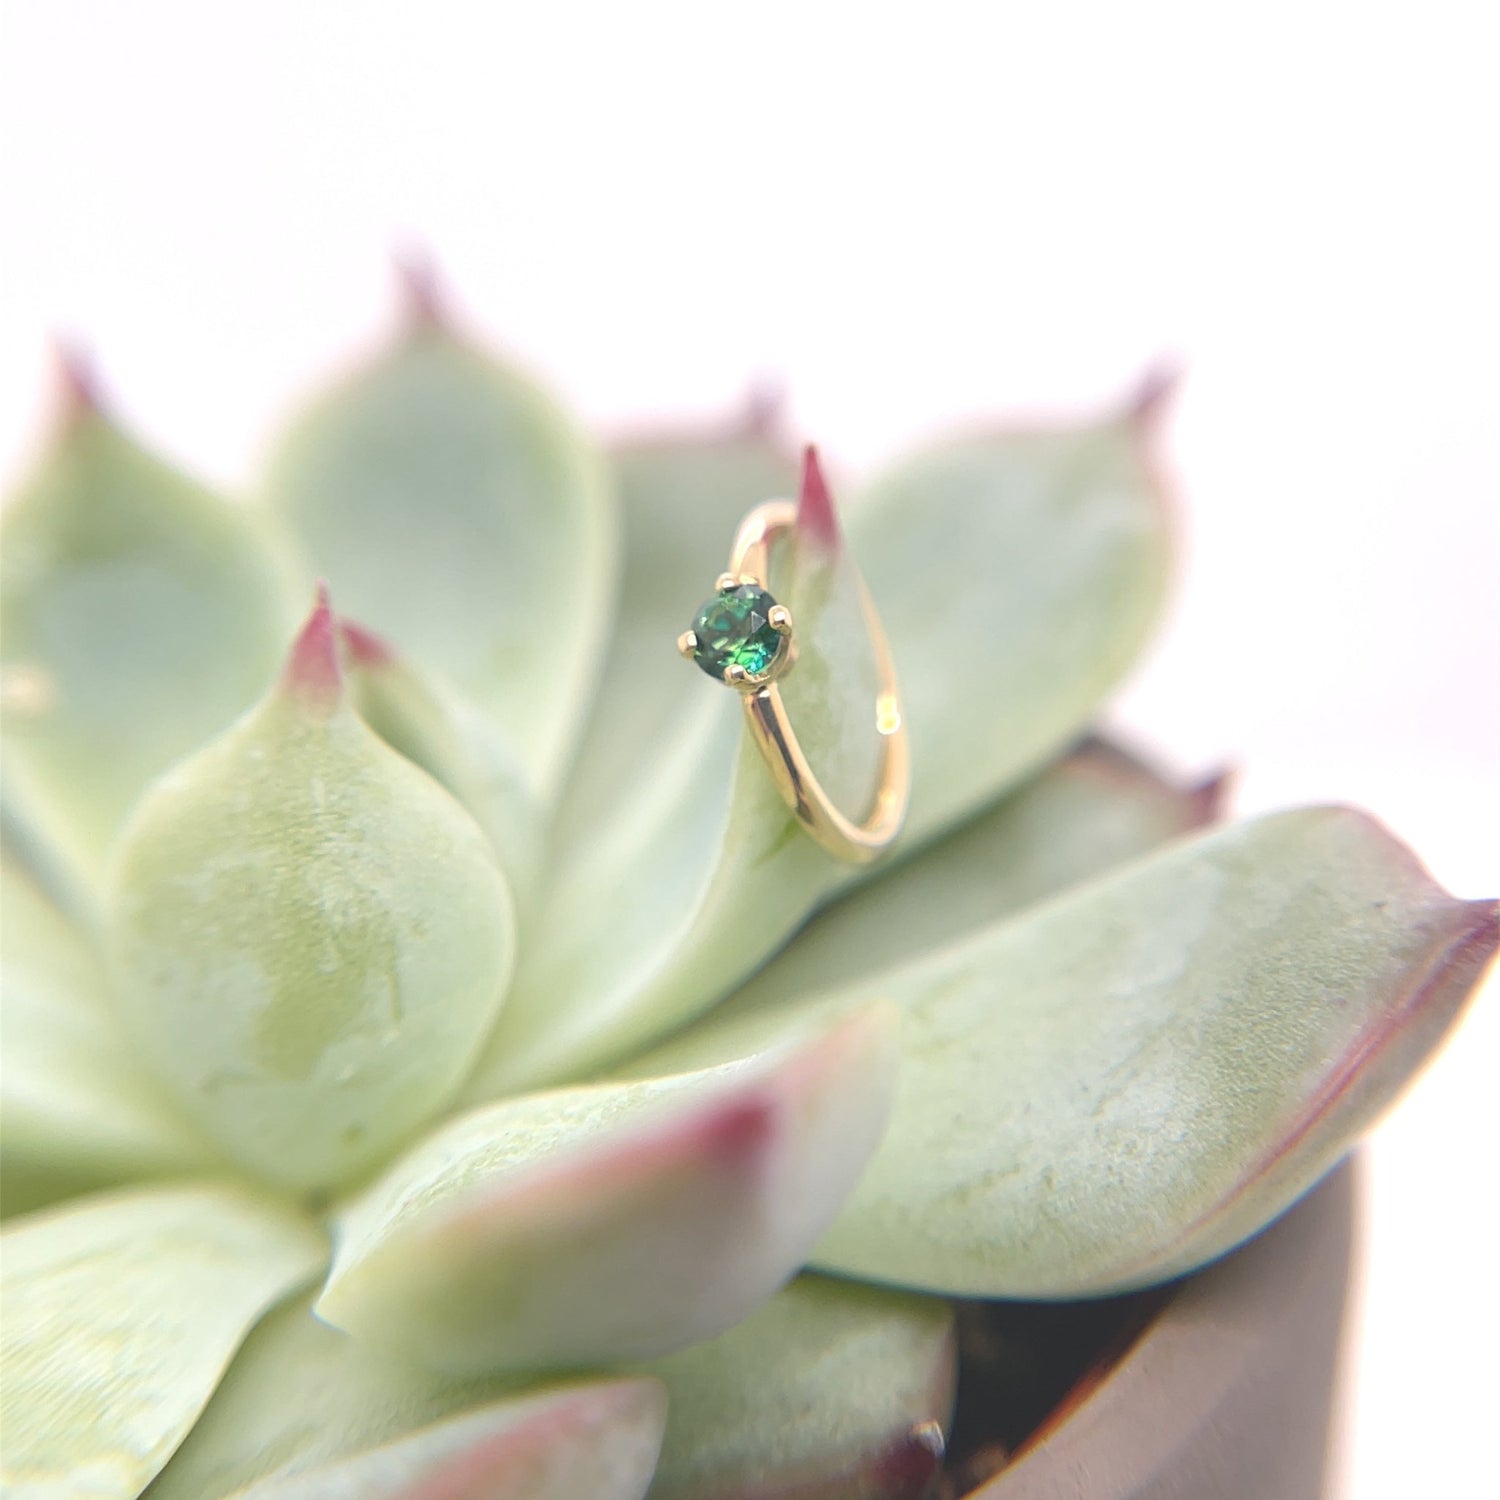 Fixed Ring with 3mm Round Prong Set Gemstone - Navel Orientation - Agave in Bloom